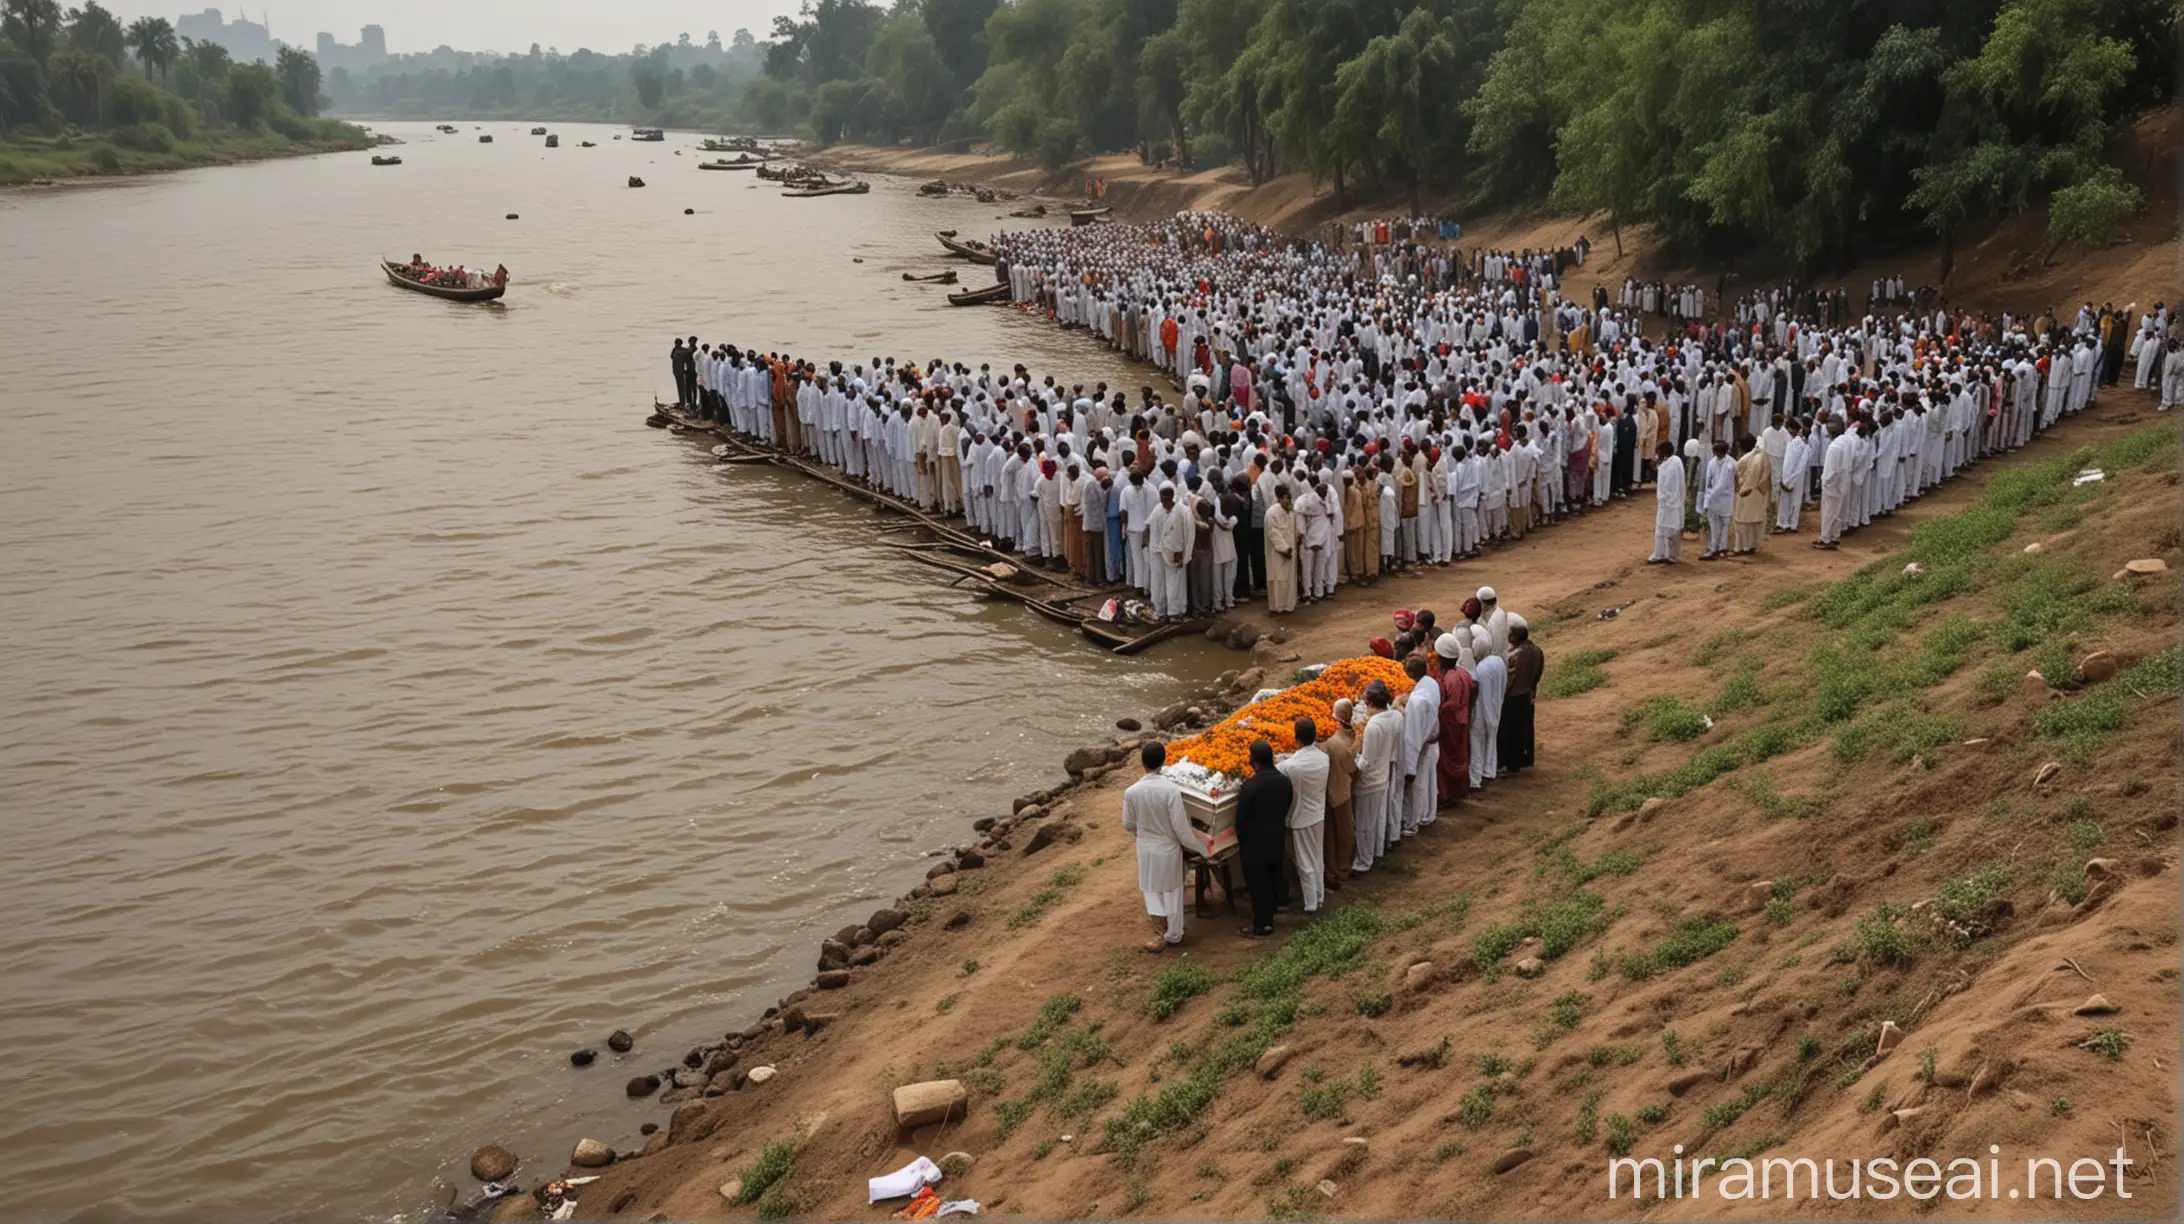 Funeral Ceremony by the River Bank in India